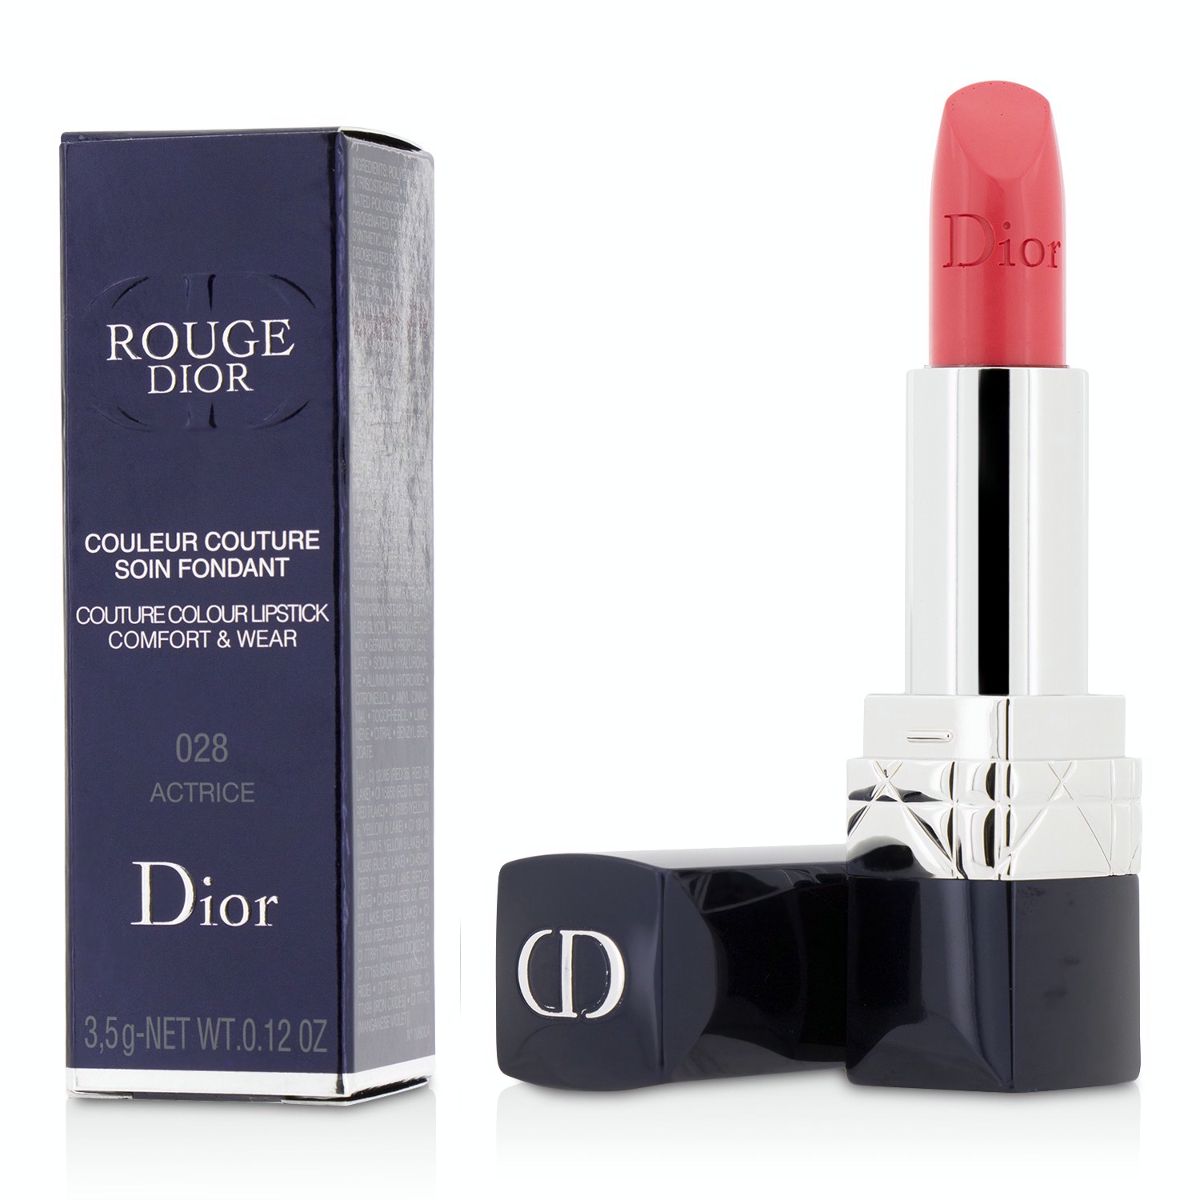 Rouge Dior Couture Colour Comfort  Wear Lipstick - # 028 Actrice Christian Dior Image